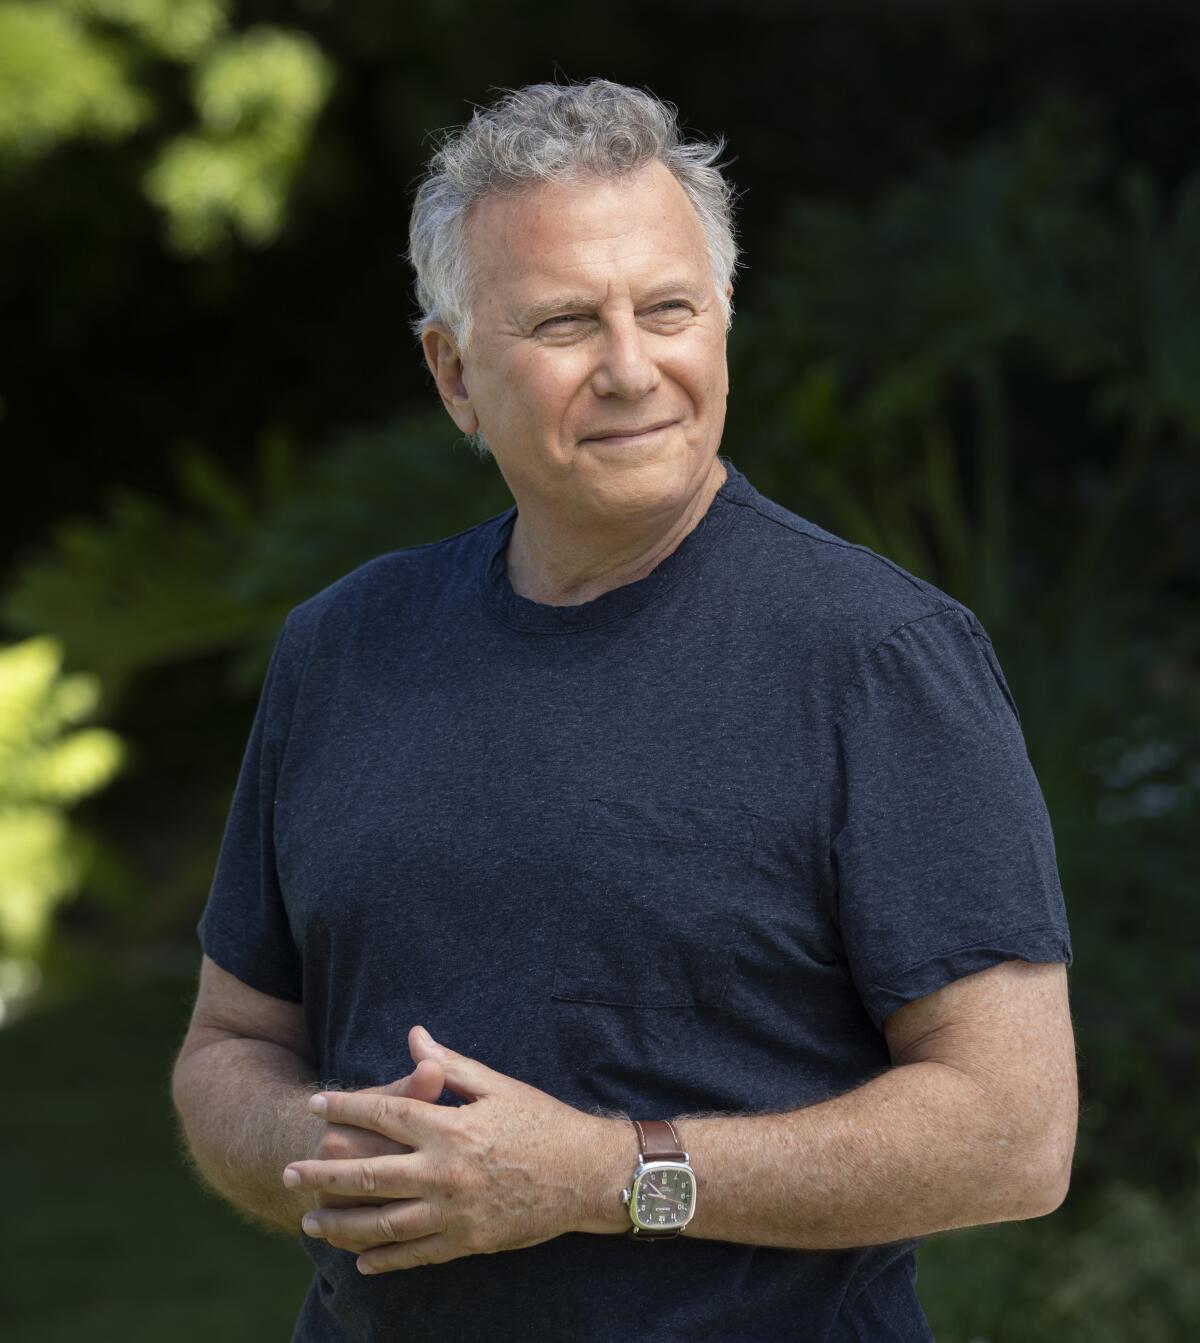 A portrait of Paul Reiser looking much better than his "Kominsky Method" character.